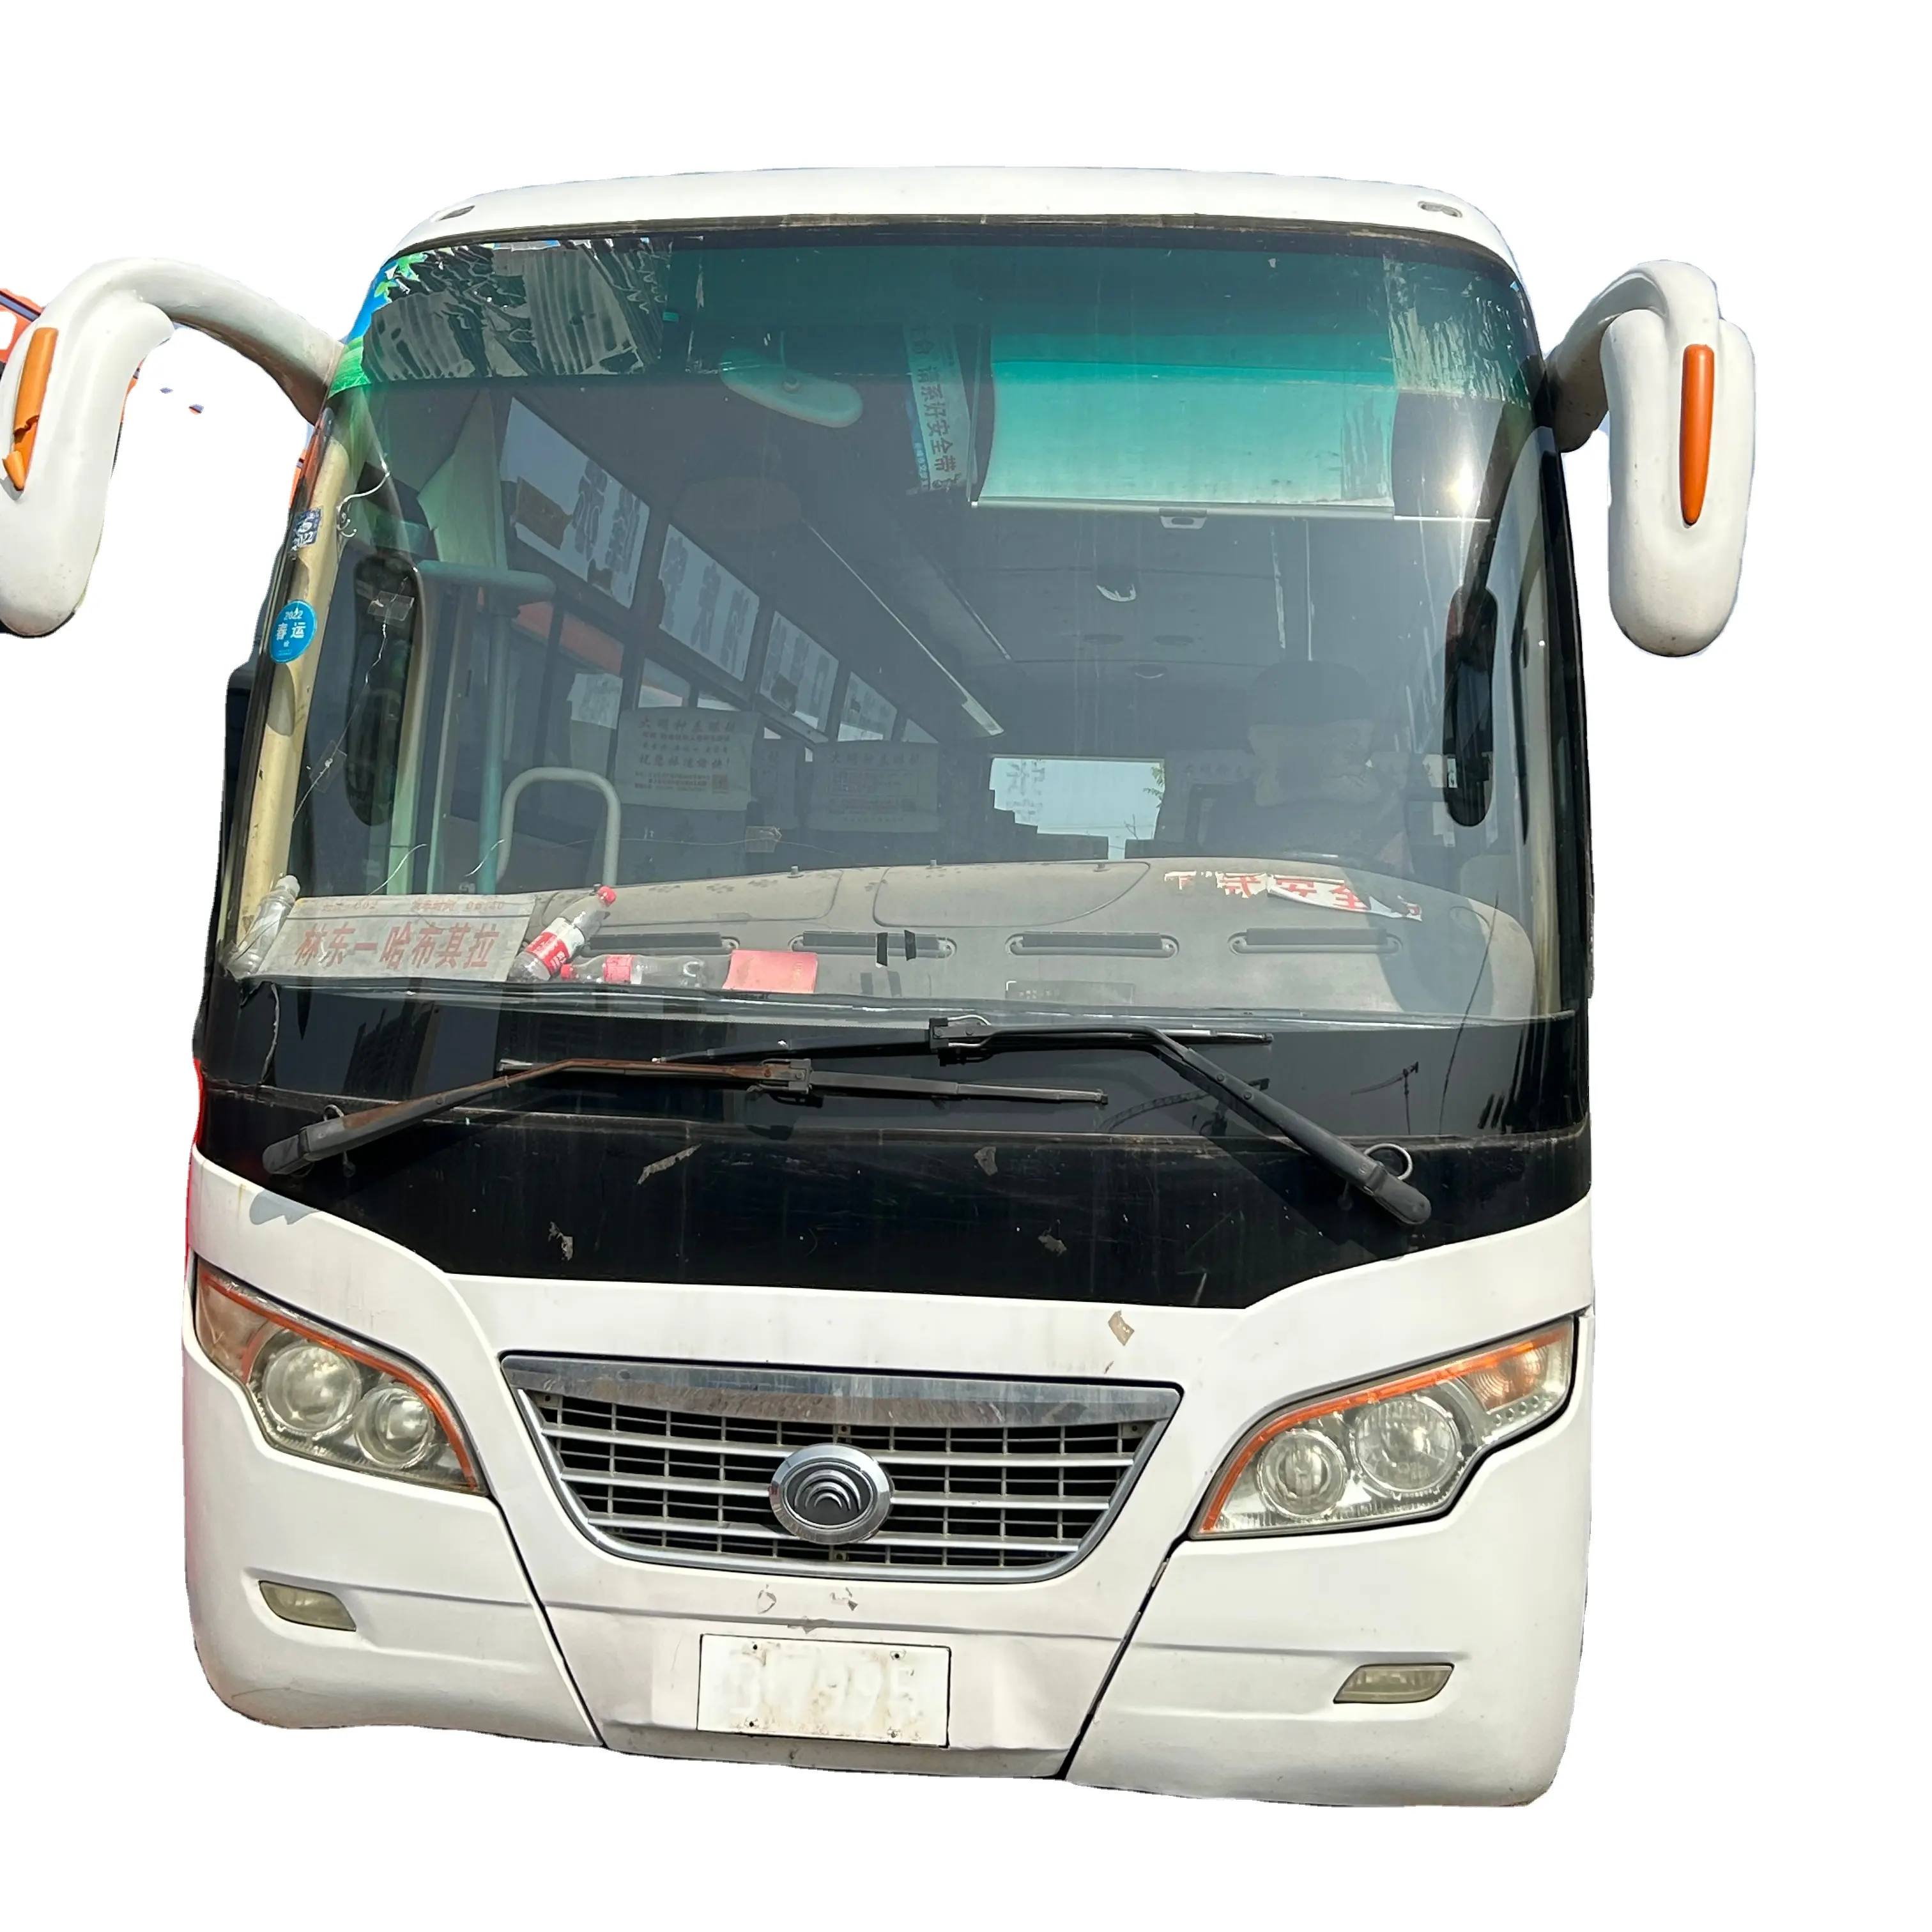 2013 year Used Yutong luxury Buses 55-60 seaters with Airbag Chassis bus school city bus for africa market sale